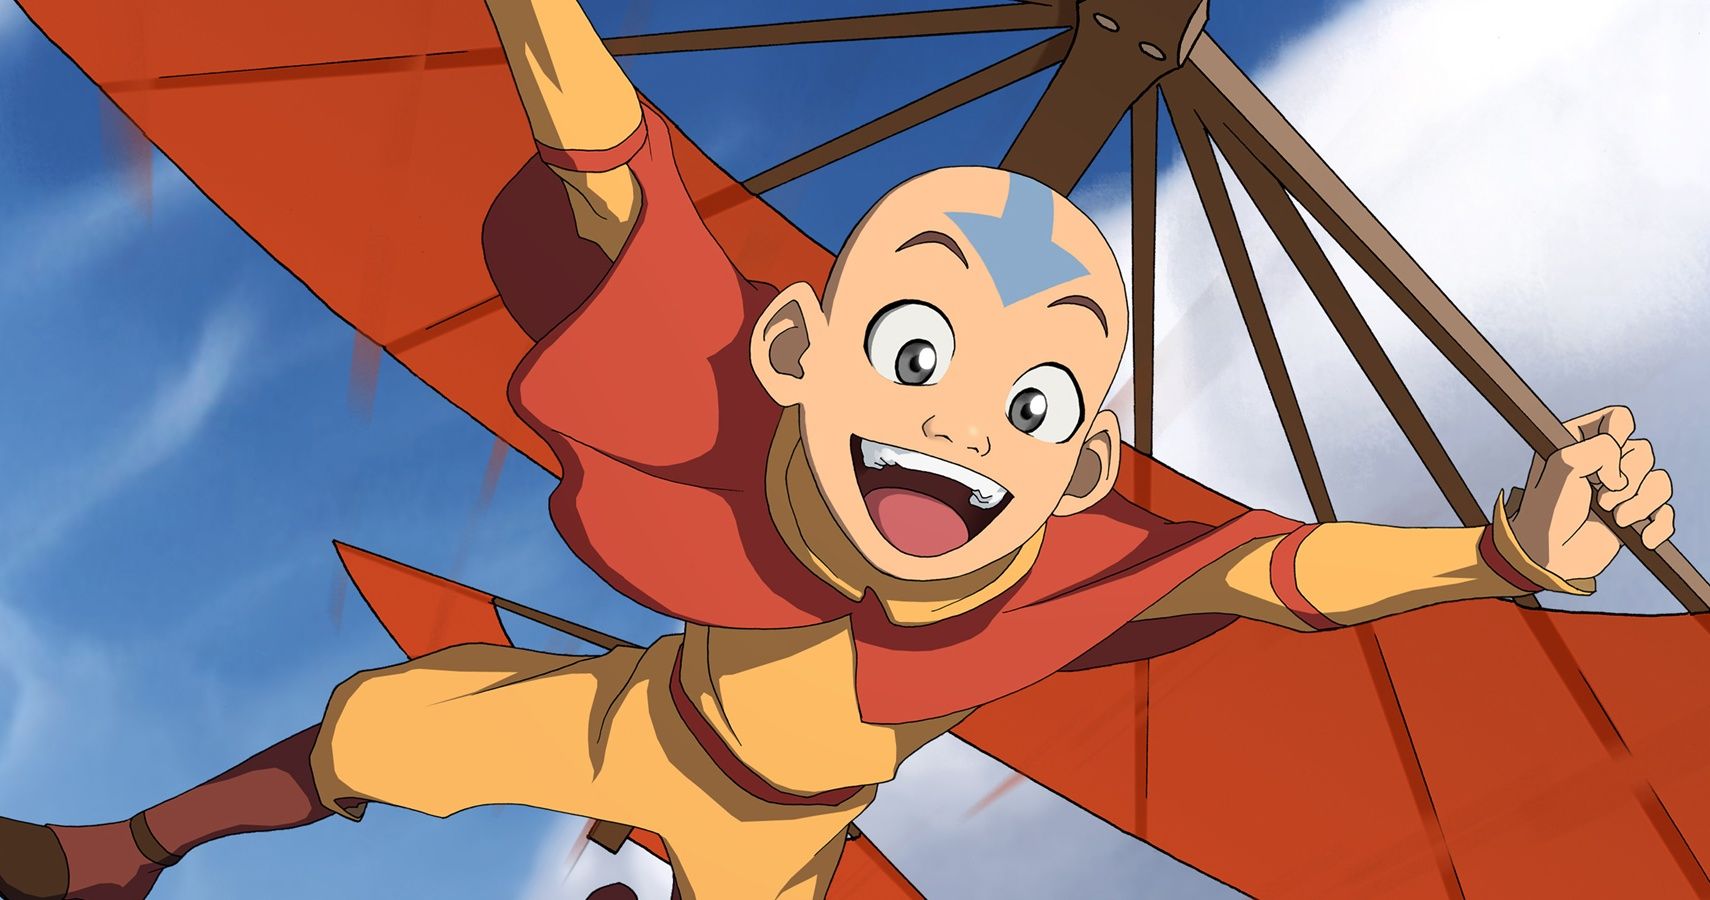 Avatar The Last Airbender 5 Reasons It Needed A Fourth Season (& 5 It Doesnt)